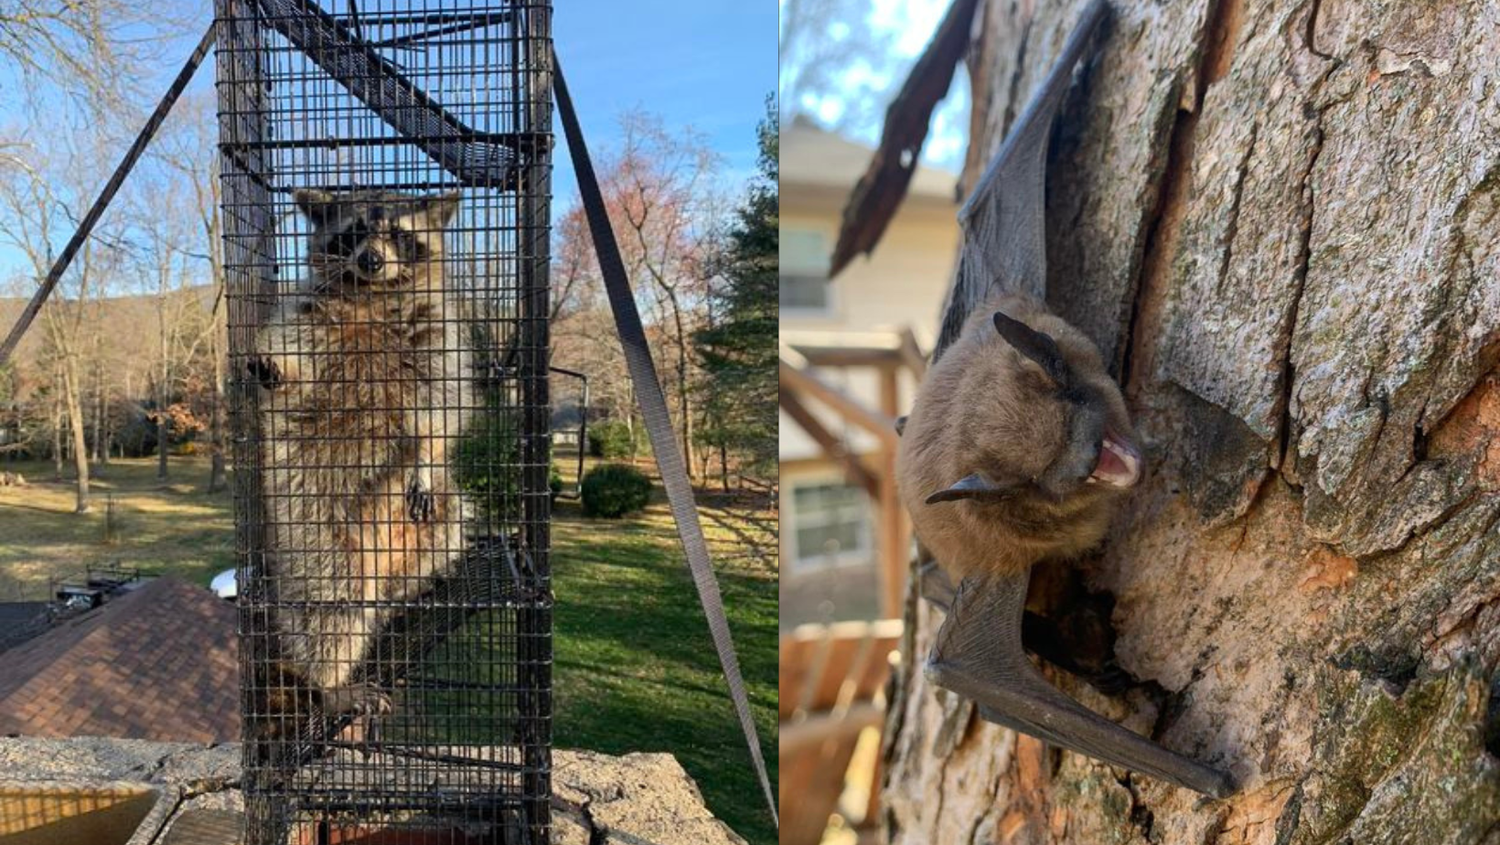 A raccoon in a cage next to a bat on a tree.